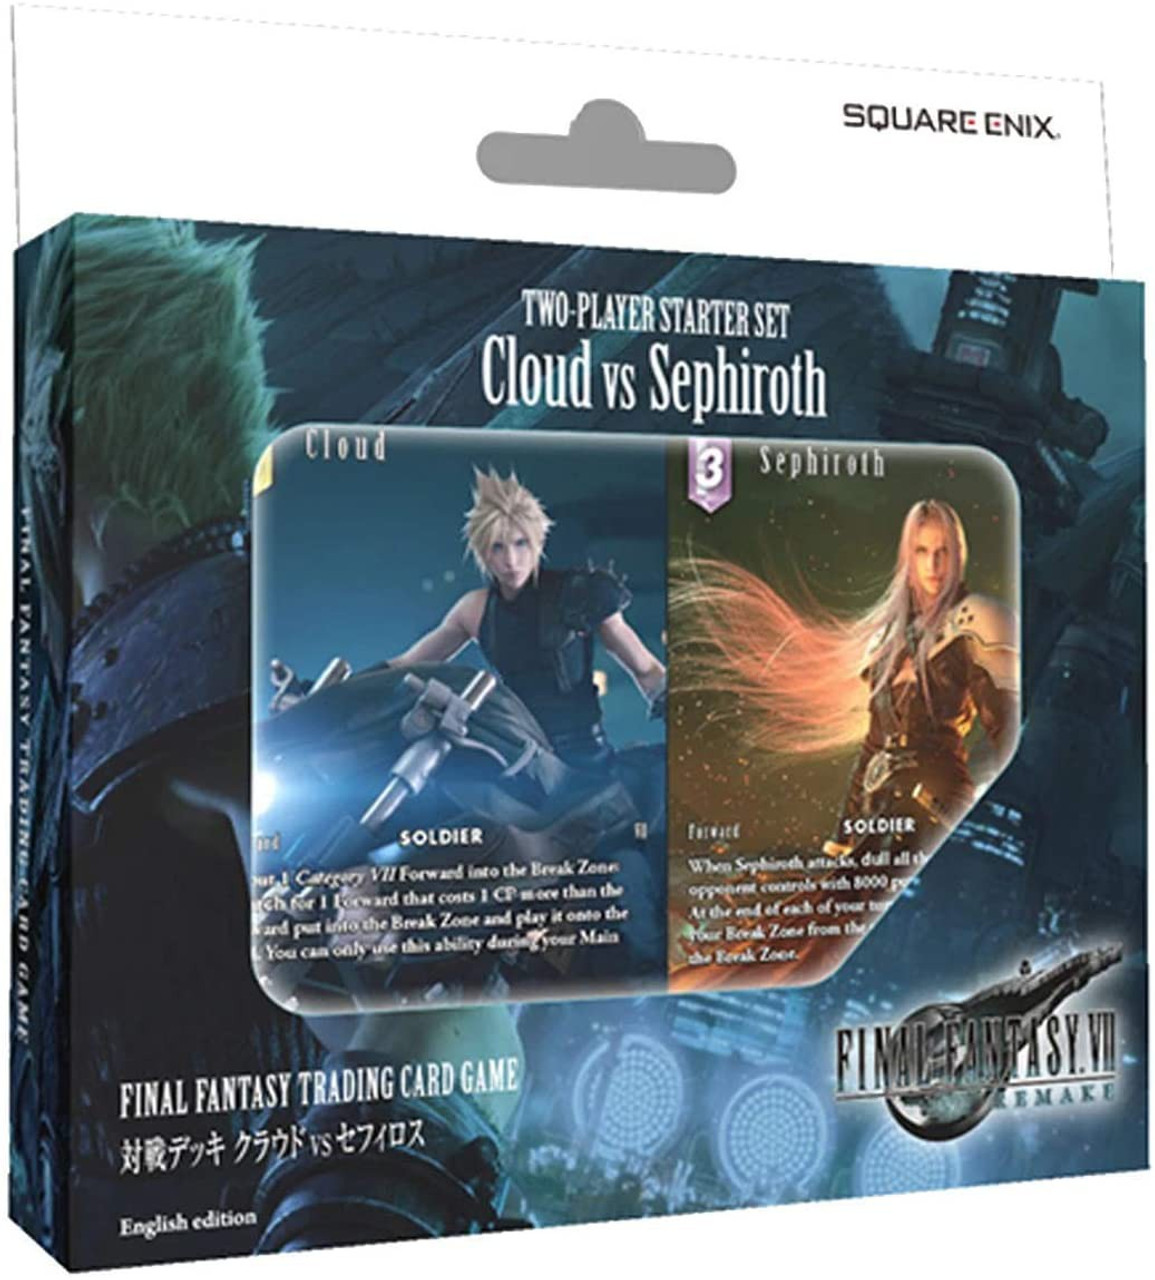 Final Fantasy Vii Remake Trading Card Game Cloud Vs Sephiroth 2 Player Starter Set Square Enix Toywiz - double jump sonic metal forces open world remake roblox